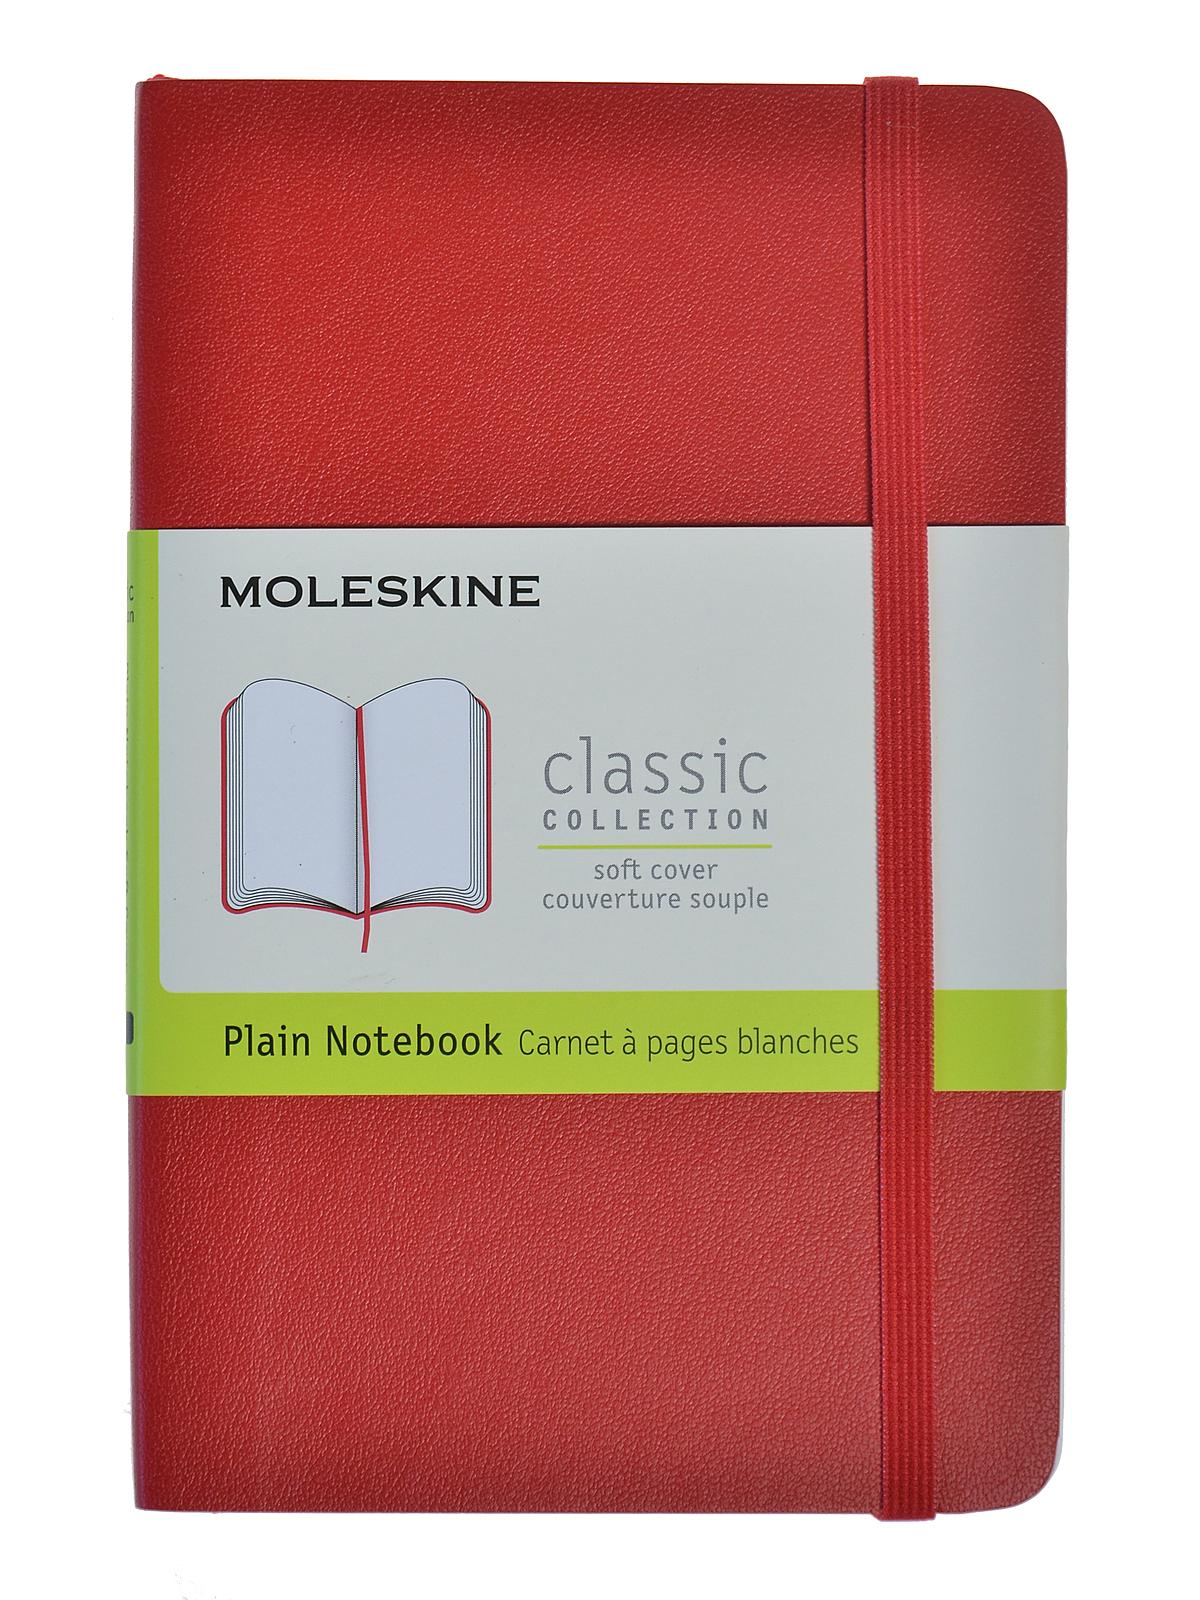 Classic Soft Cover Notebooks Red 3 1 2 In. X 5 1 2 In. 192 Pages, Unlined